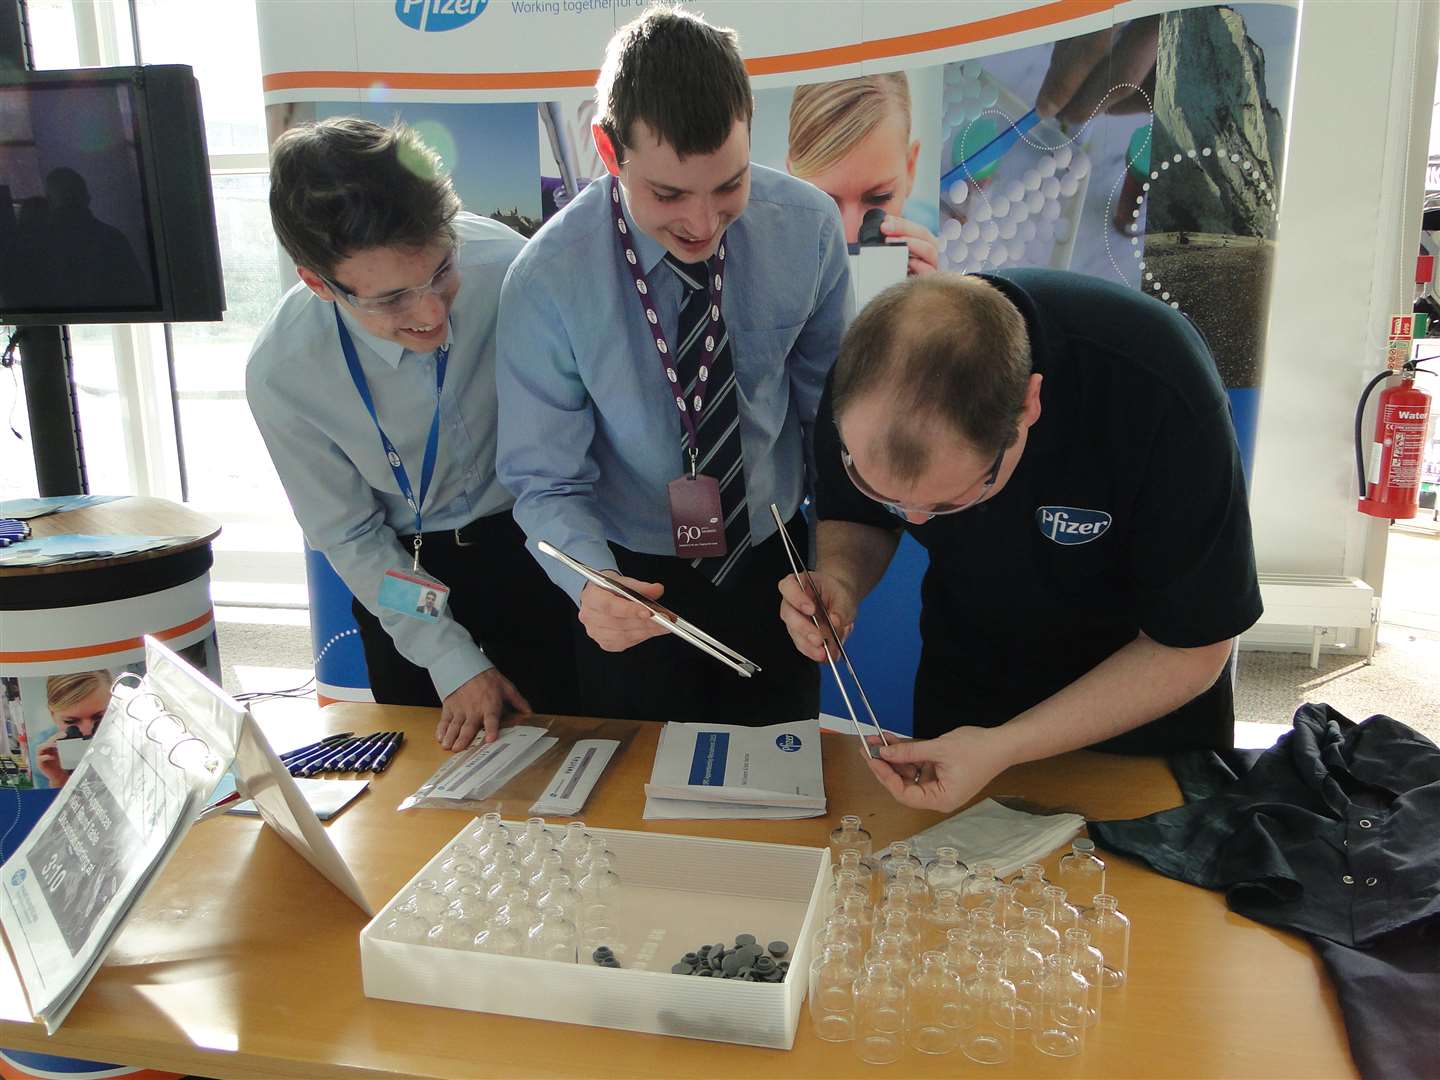 Pfizer hosts information event to find out about apprentices